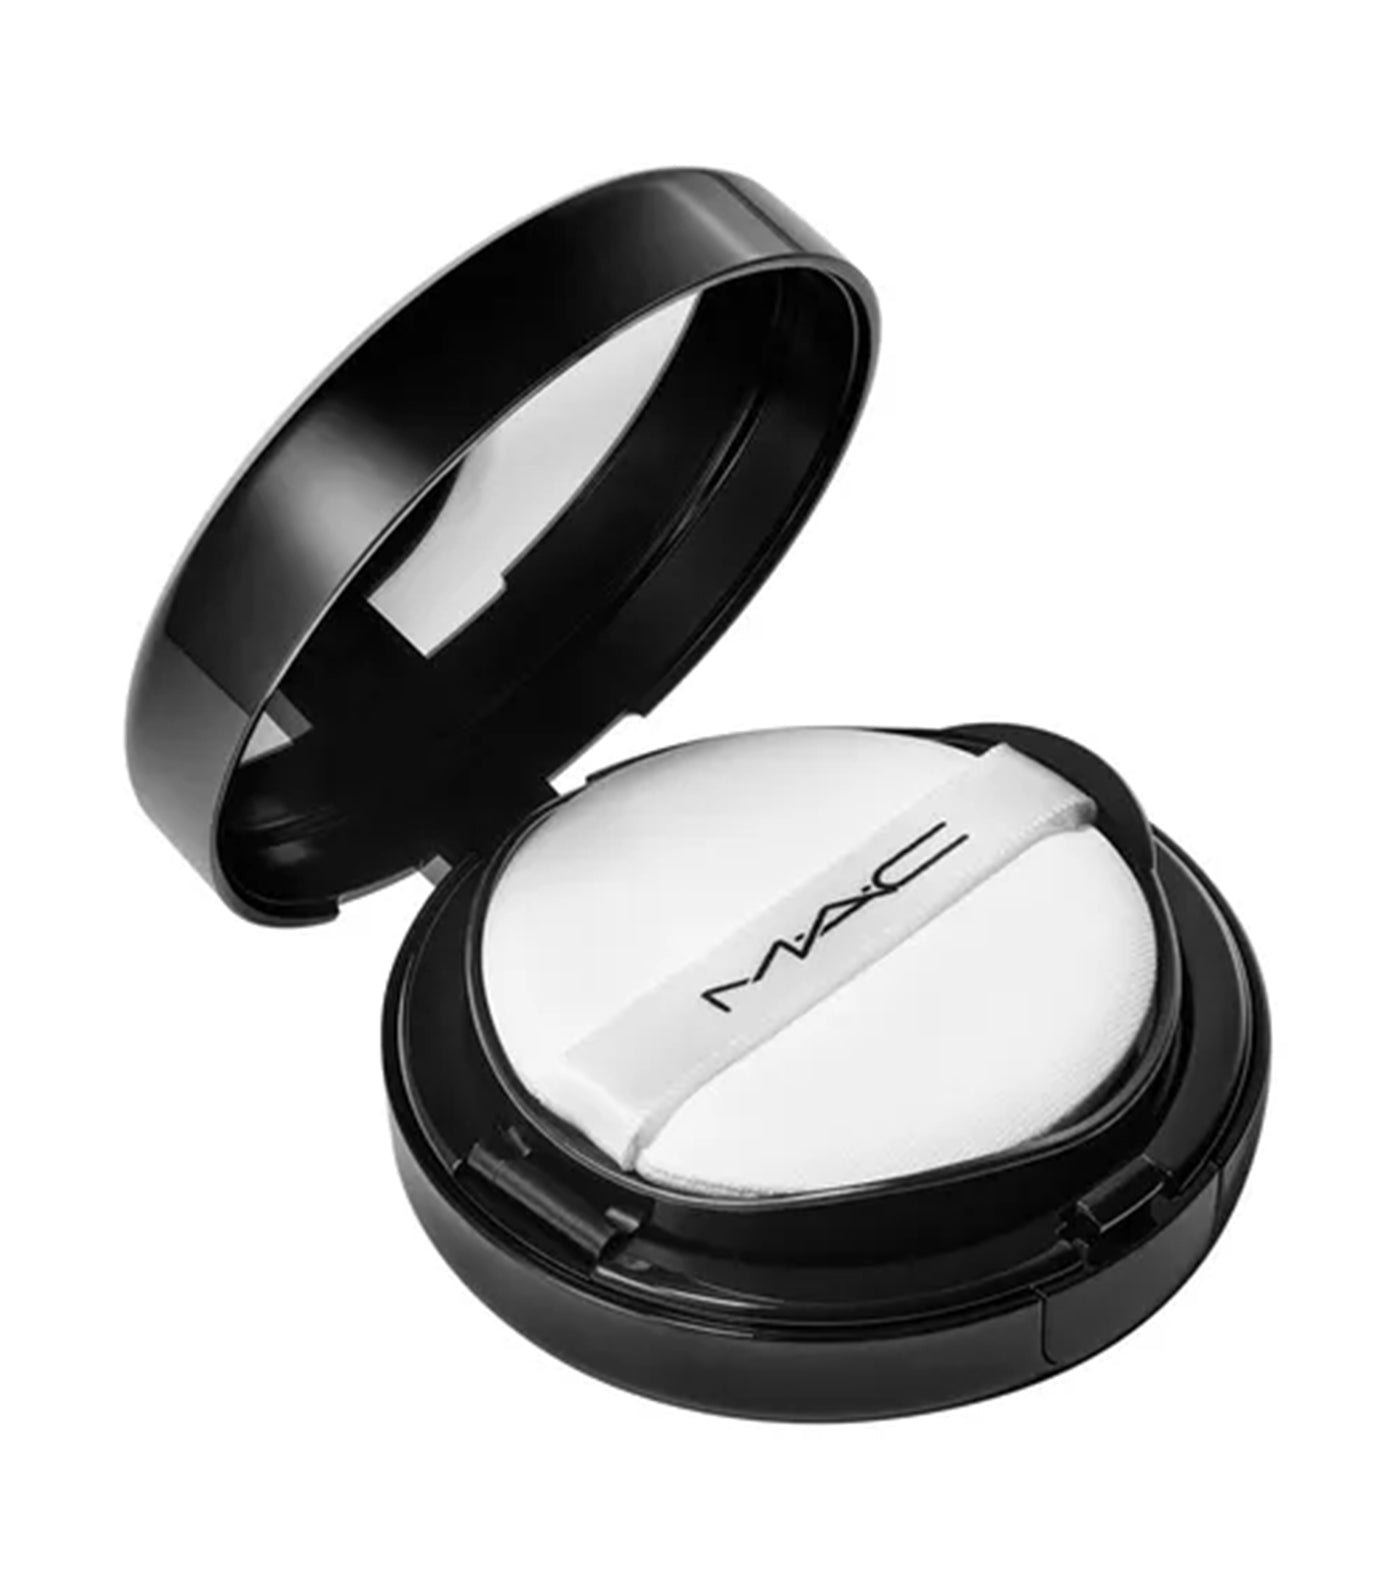 Lightful C³ Quick Finish Cushion Compact SPF 50 / PA++++ with Light-Diffusing Complex